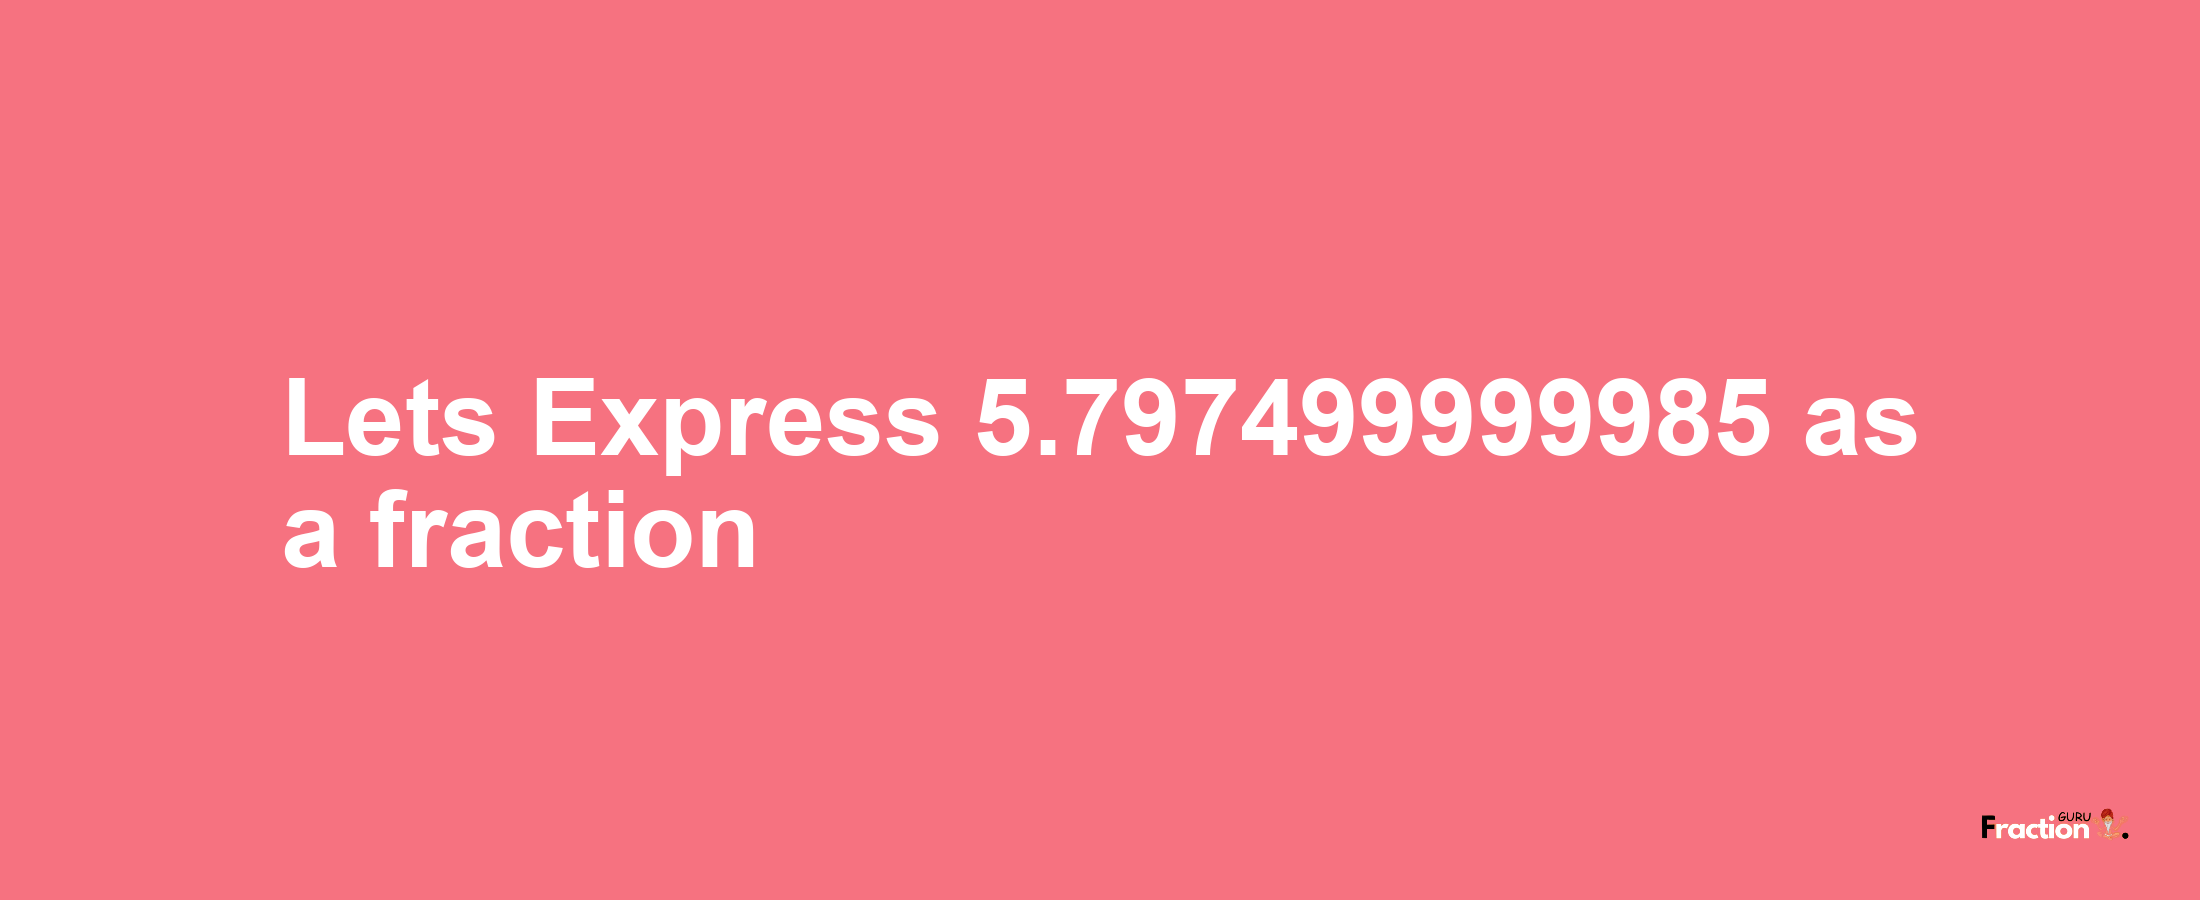 Lets Express 5.797499999985 as afraction